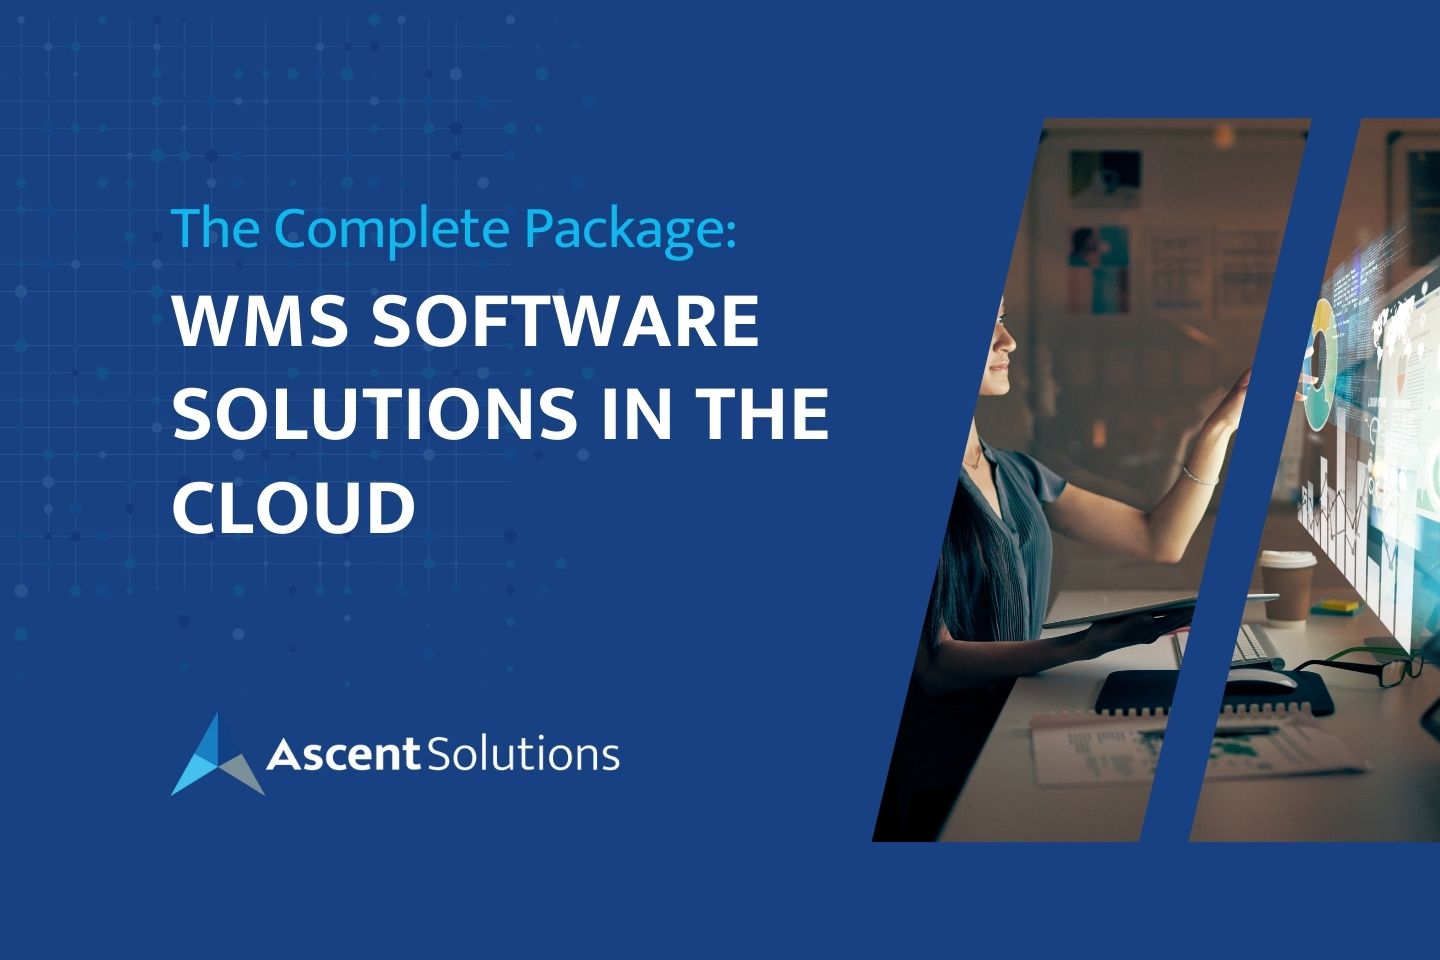 The Complete Package WMS Software Solutions in the Cloud